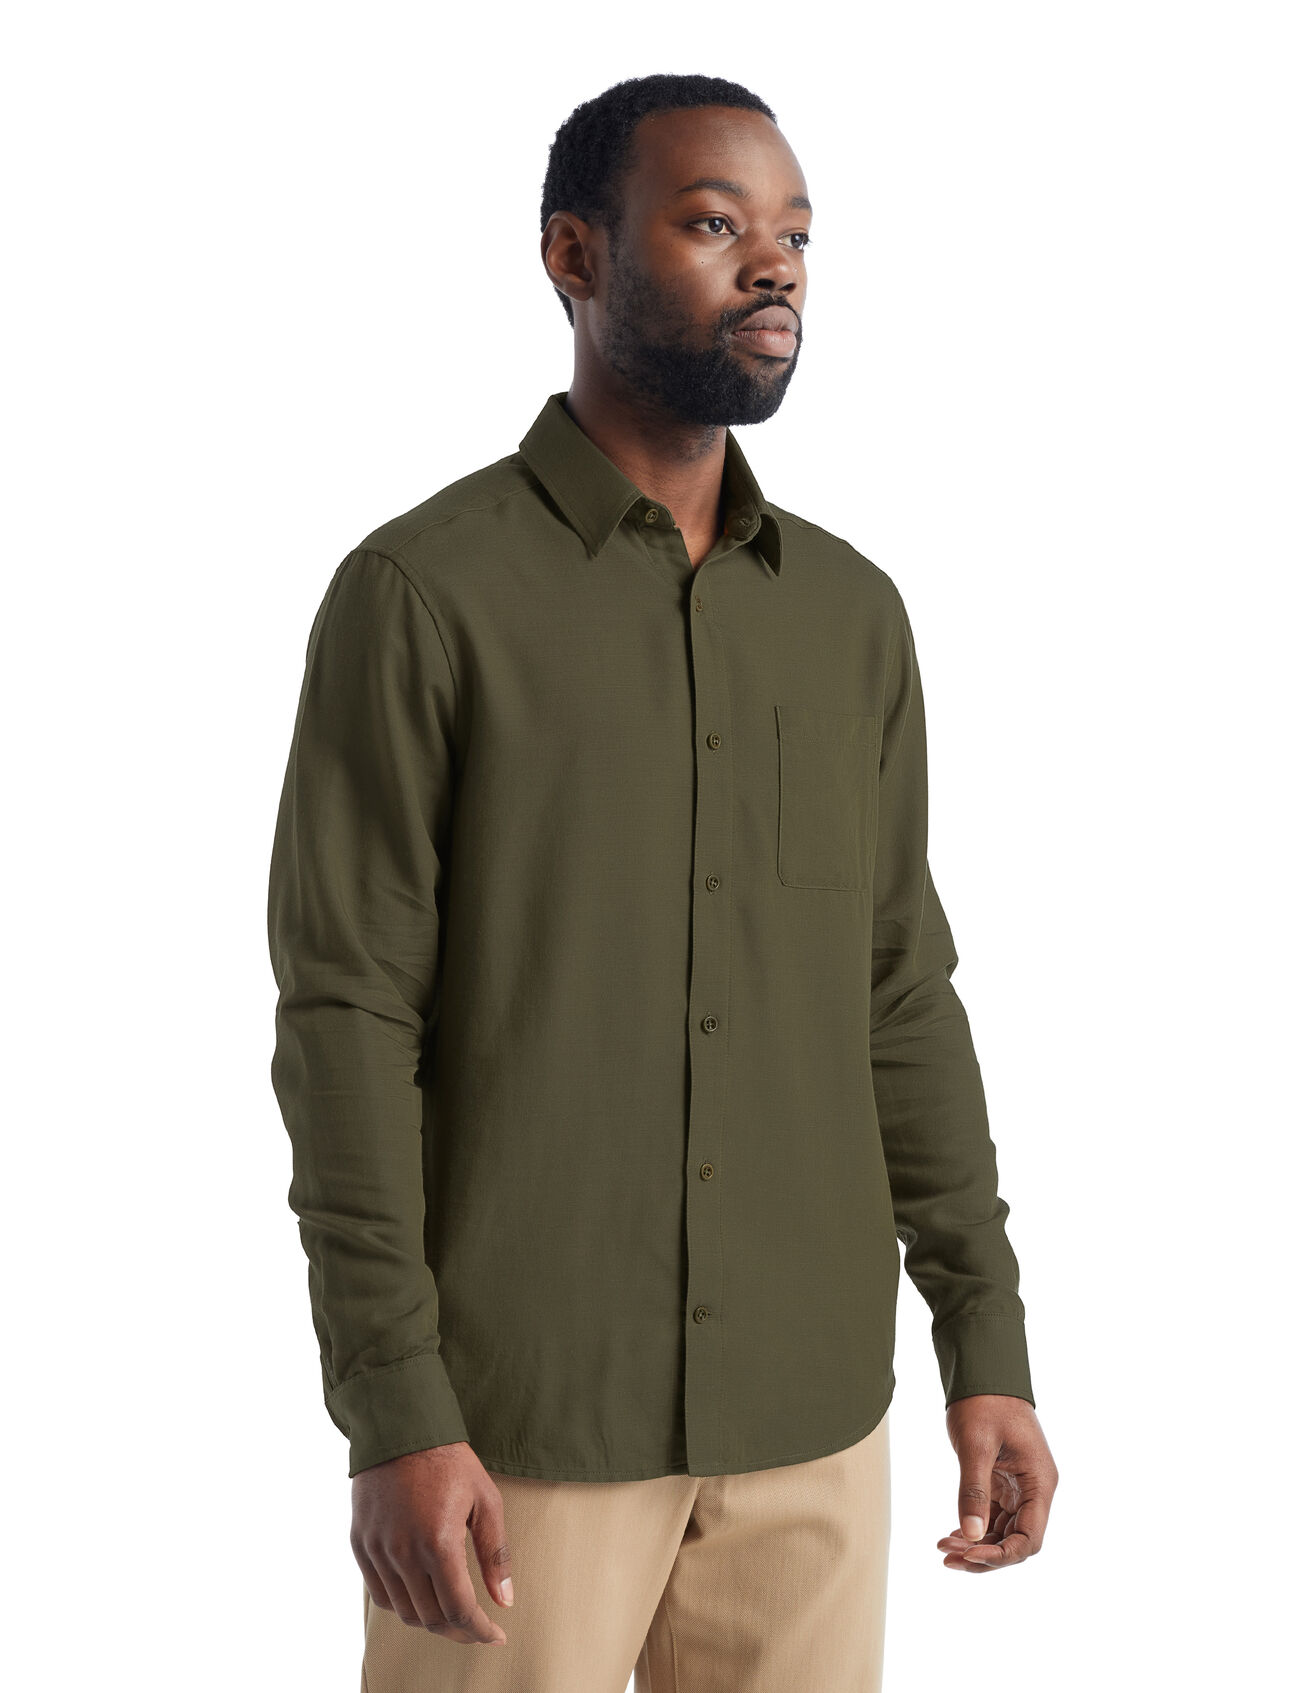 Mens Merino Steveston Long Sleeve Shirt A classic lightweight woven shirt featuring our breathable Cool-Lite™ woven merino blend, the Steveston Long Sleeve Shirt combines versatile style with natural comfort.